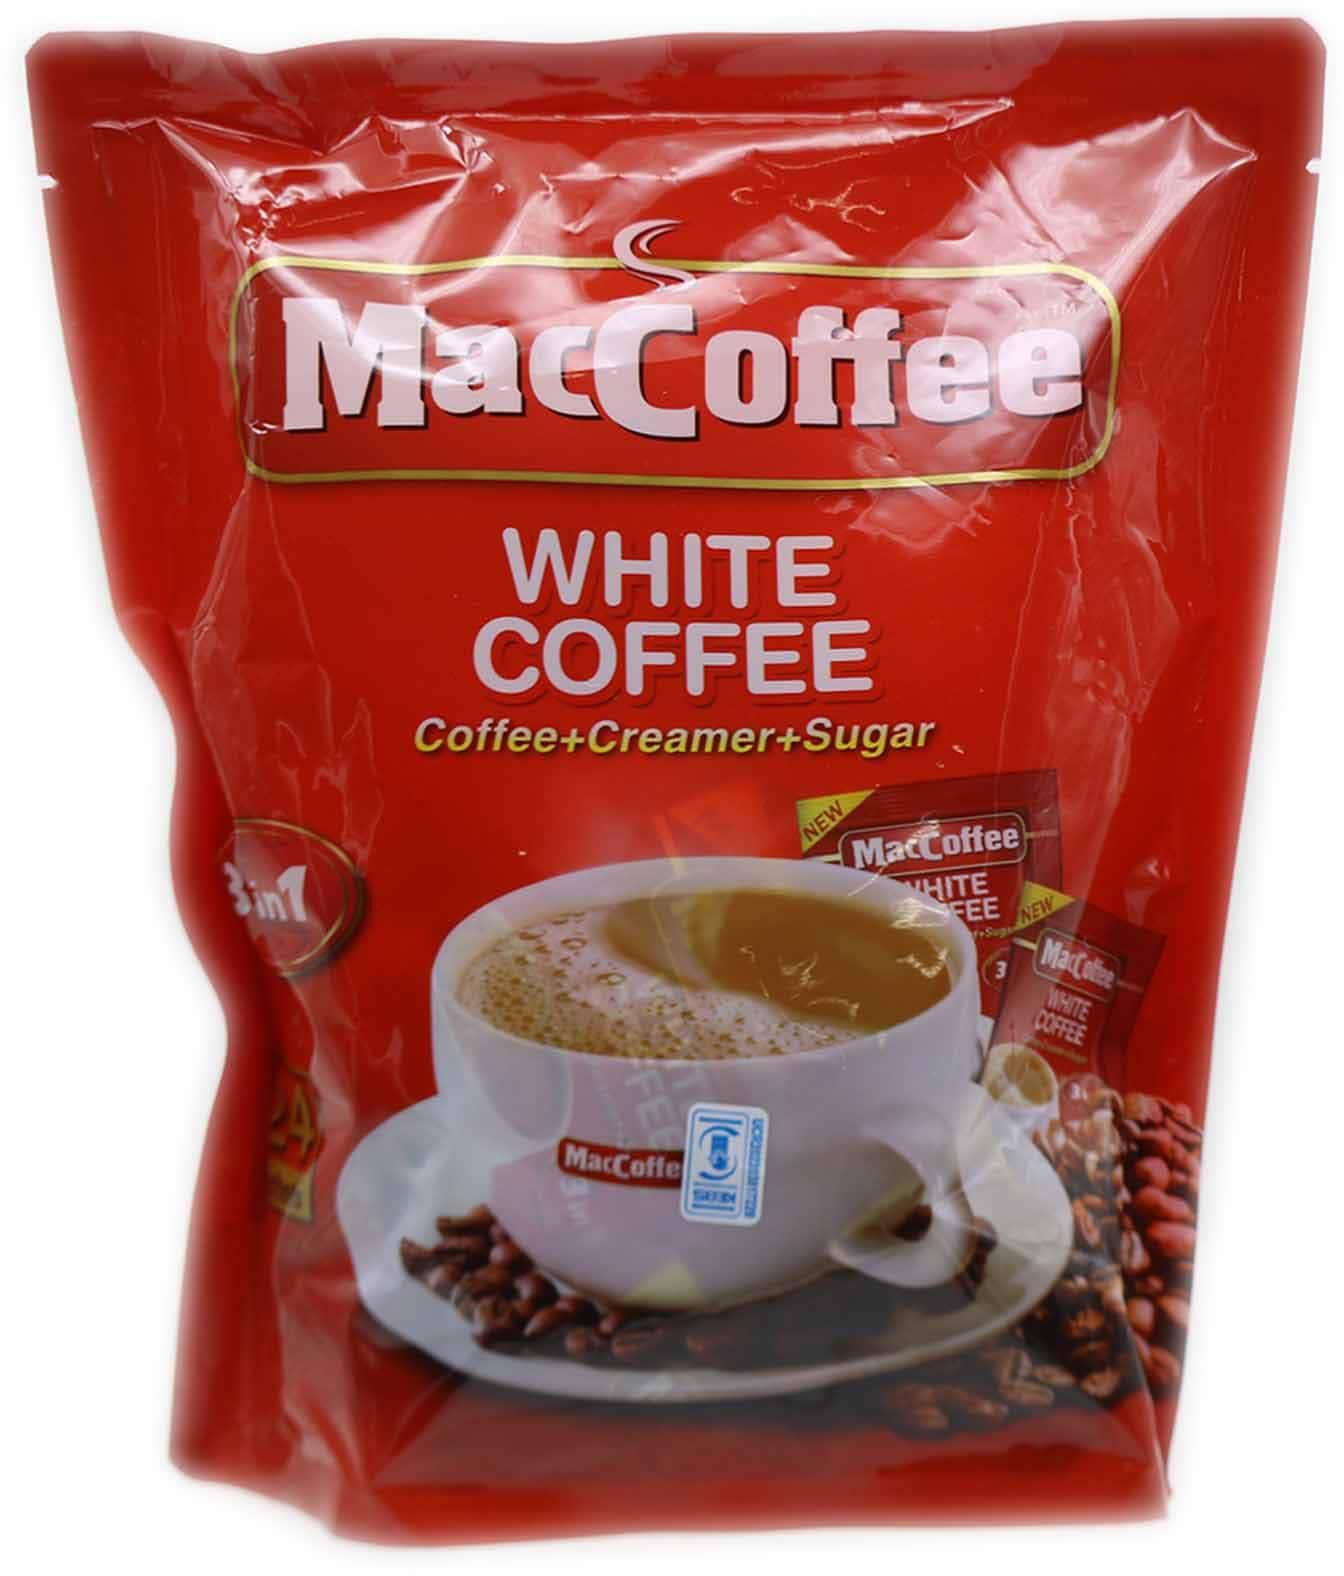 Maccoffee 3 In 1 Plus White Coffee Mix 15g x Pack of 24